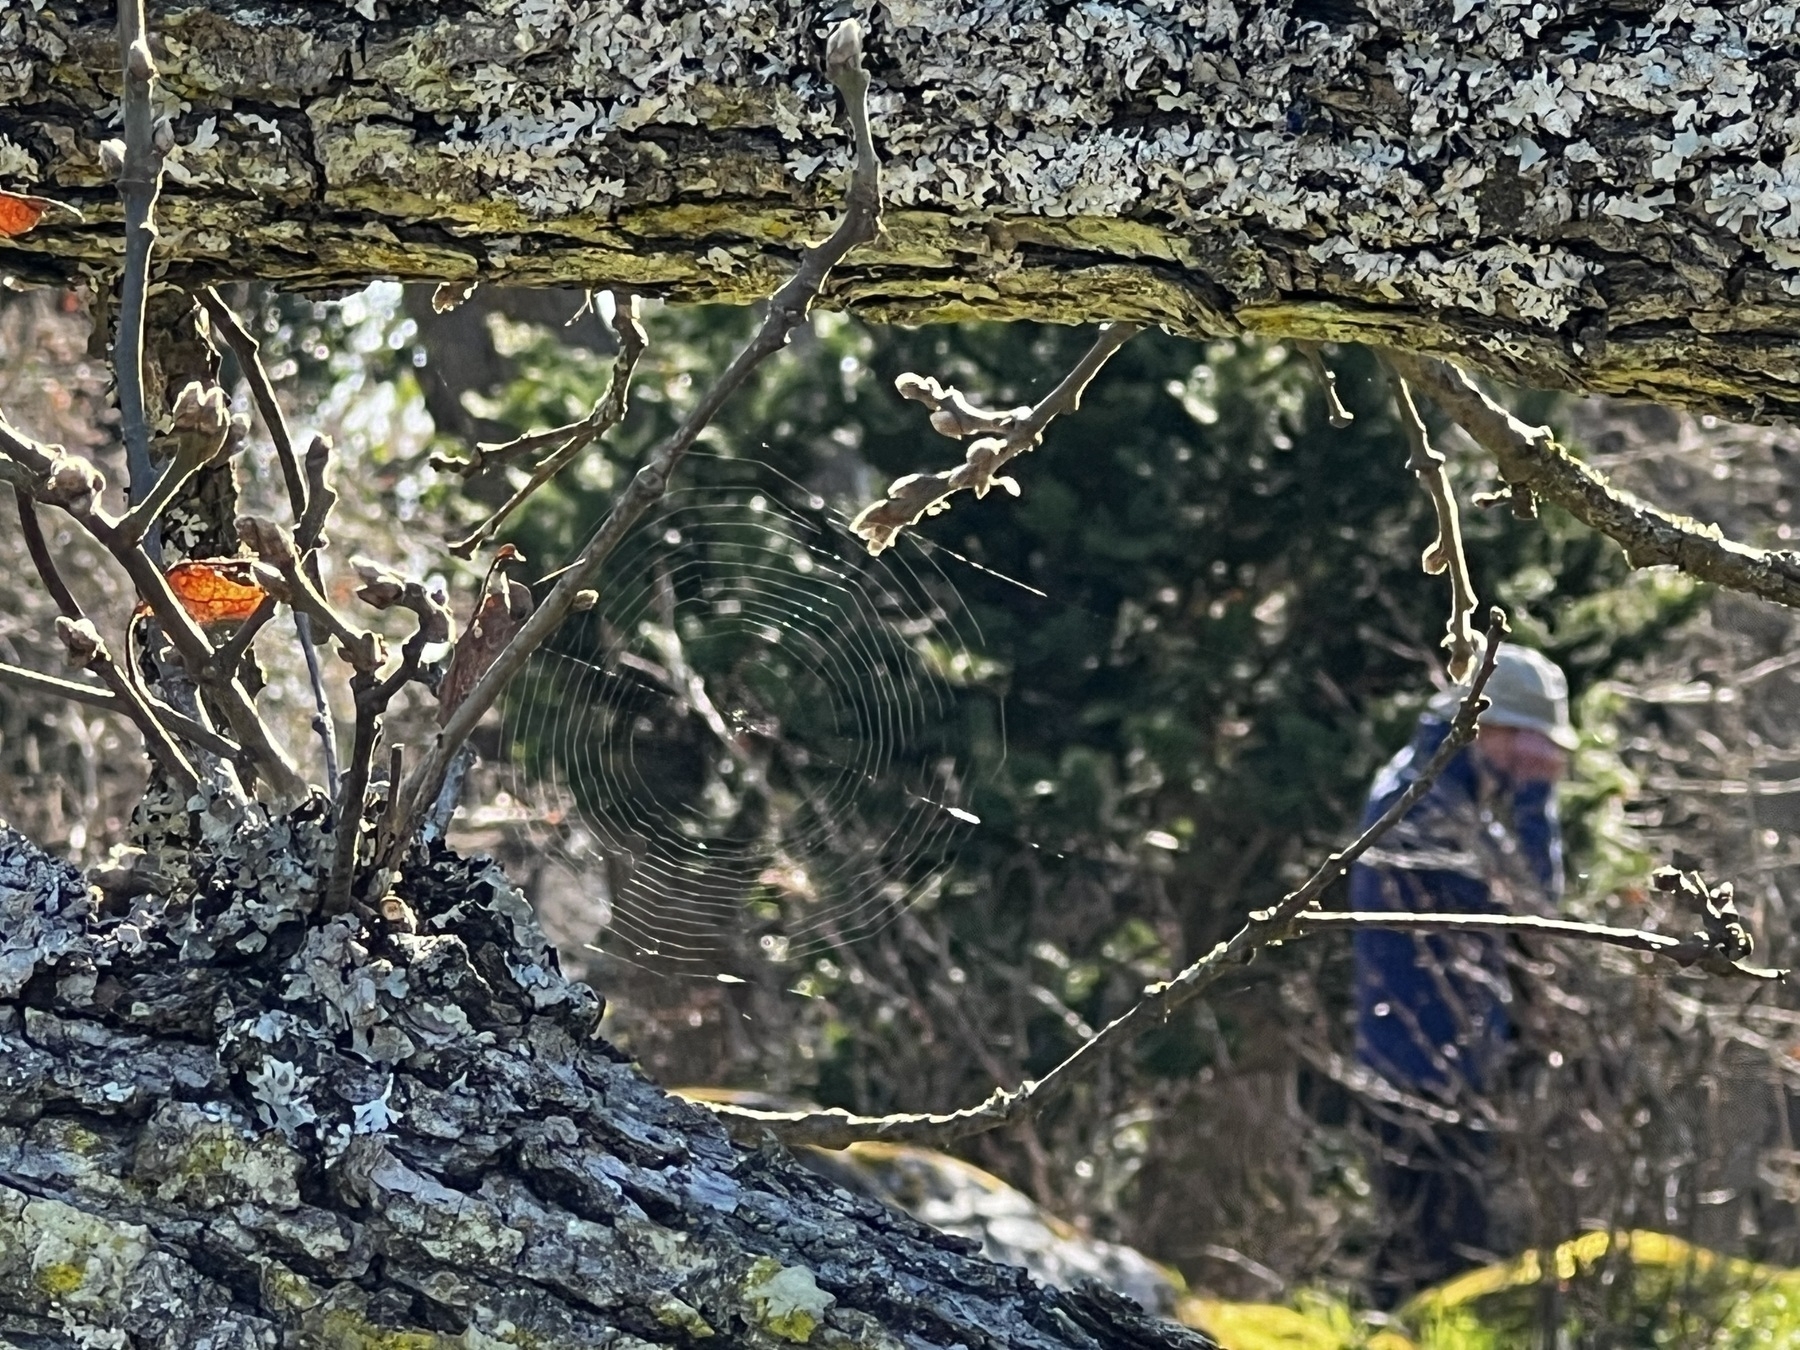 Shot of a thin but intricate spider’s web woven between the branches of a downed tree.